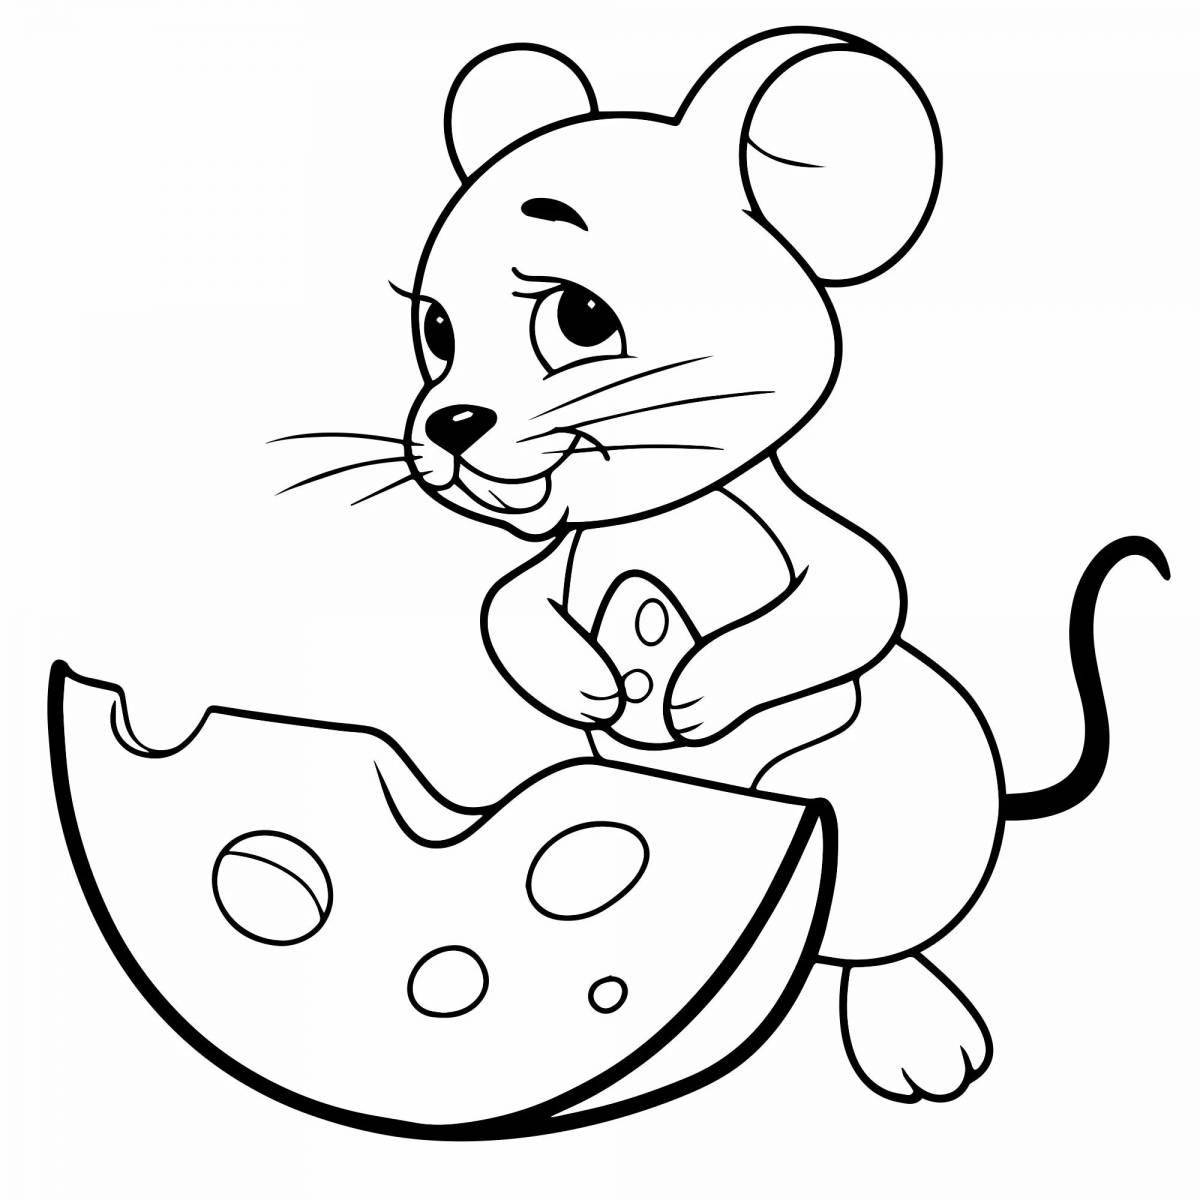 Fun coloring mouse and bear